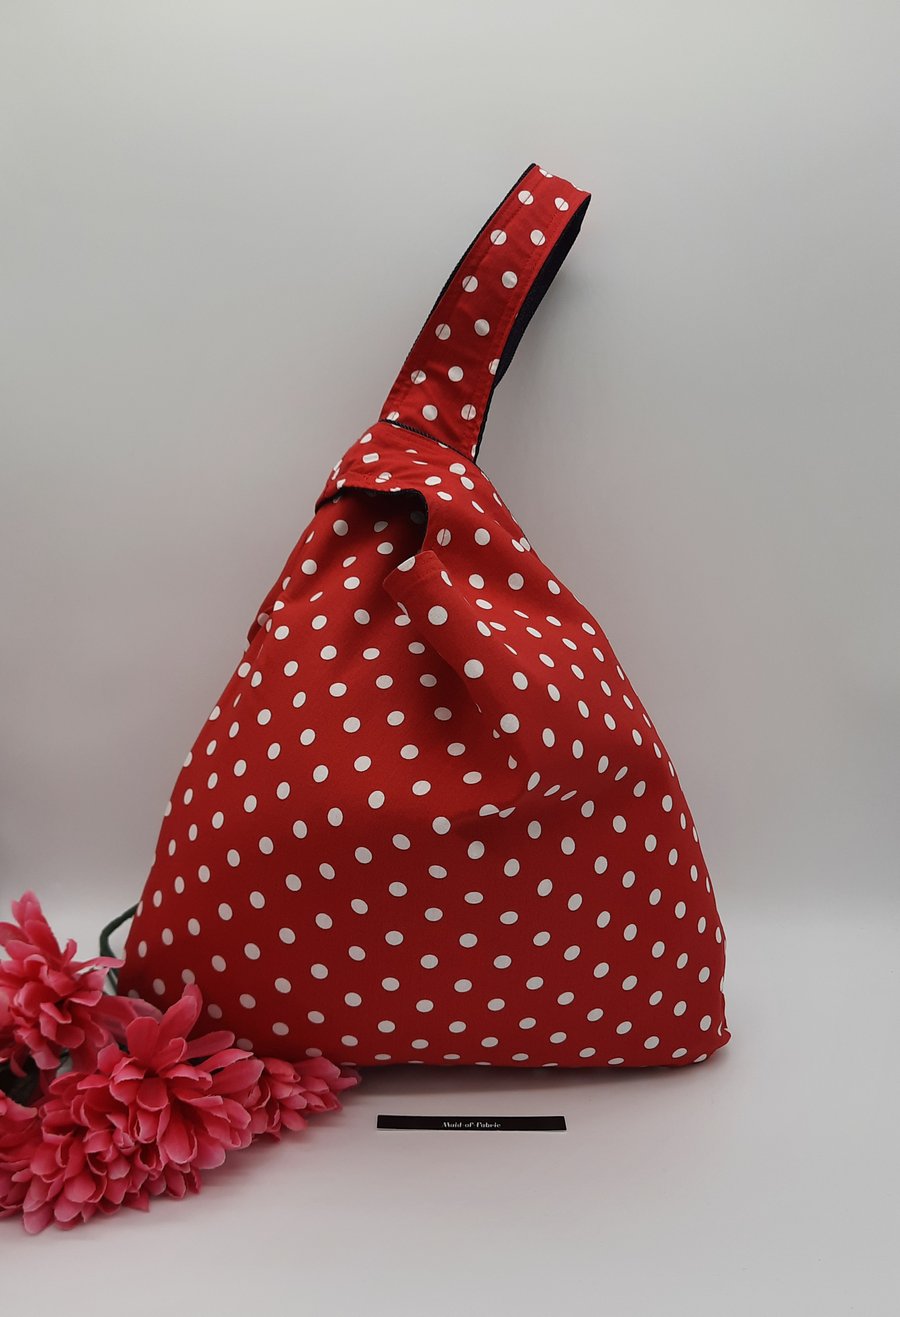 Knot bag reversible, denim and red polkadot, medium size, free UK delivery 